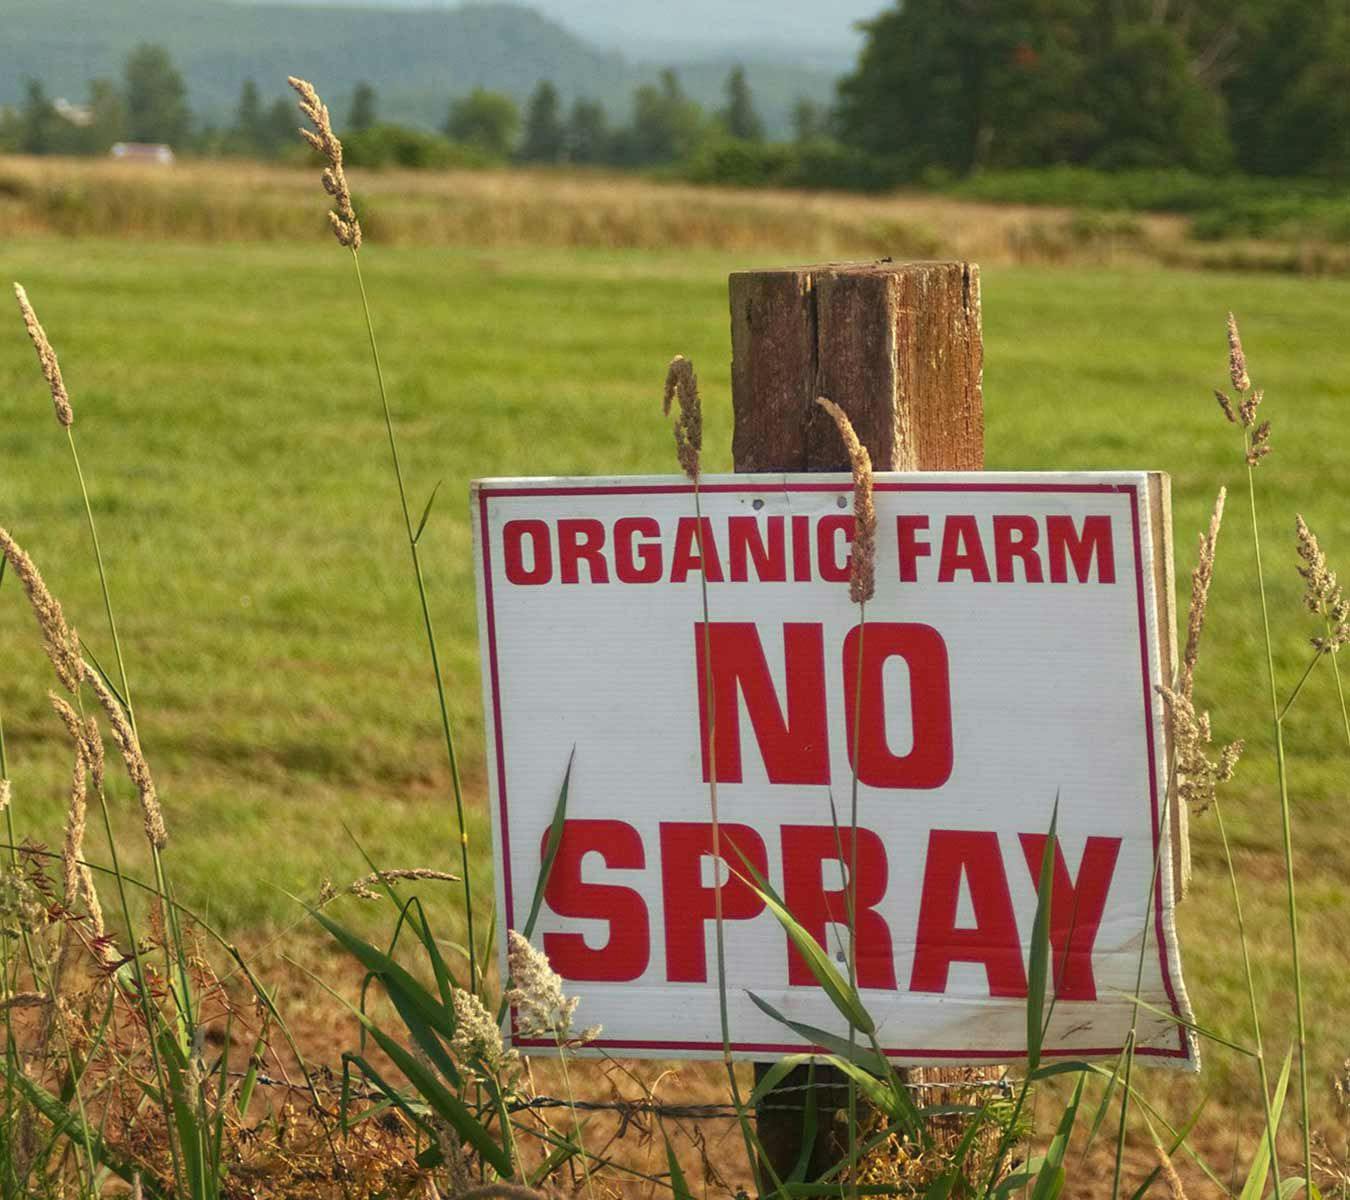 Organic Valley farmers use innovative techniques instead of toxic pesticides and fertilizers.